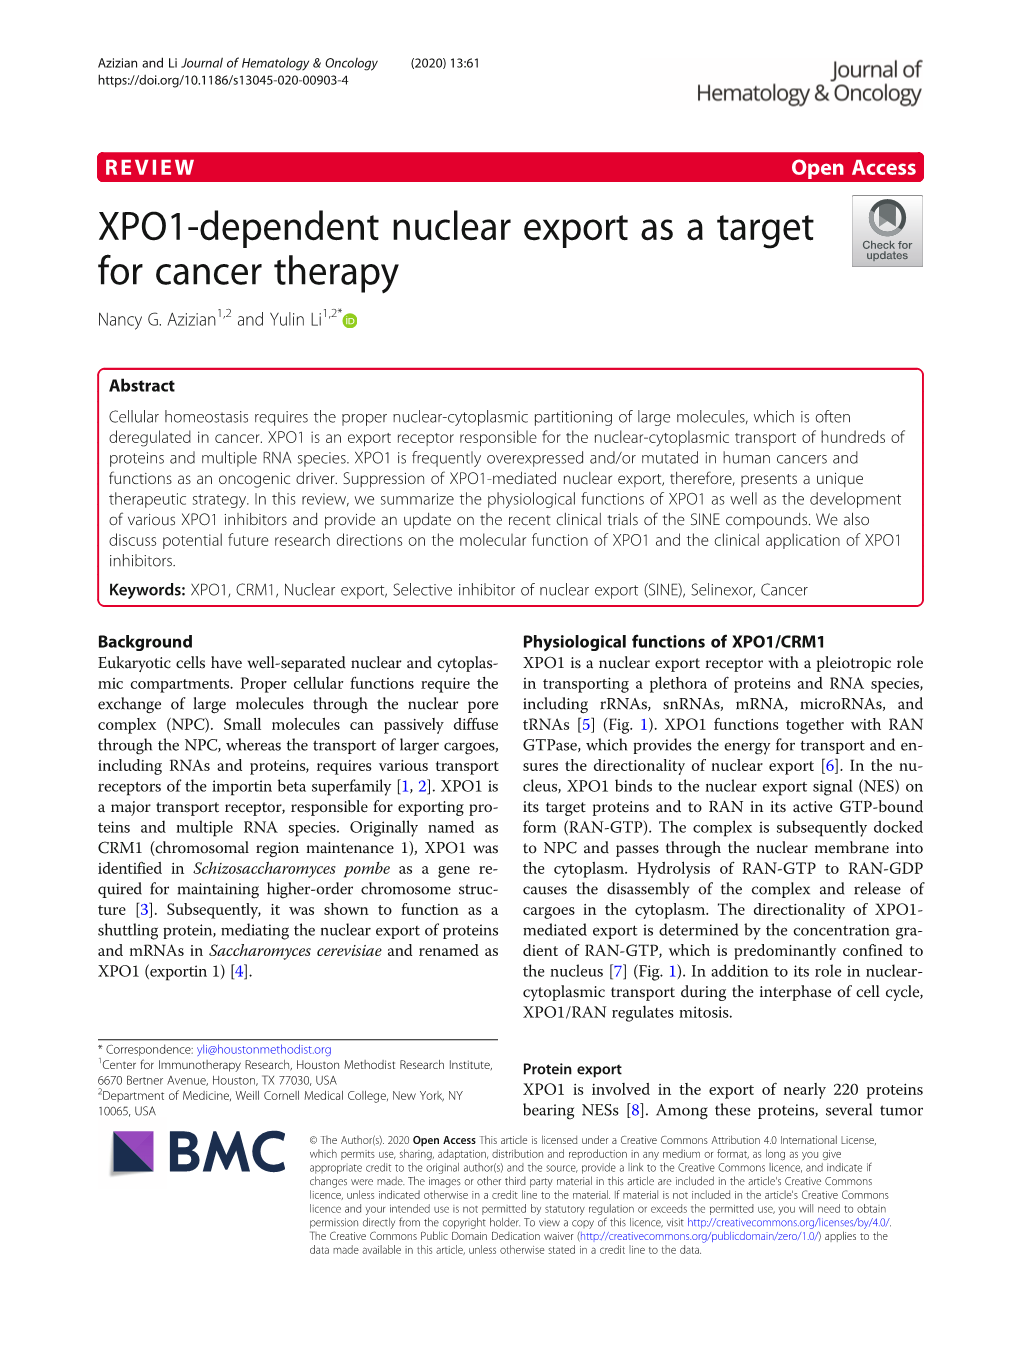 XPO1-Dependent Nuclear Export As a Target for Cancer Therapy Nancy G